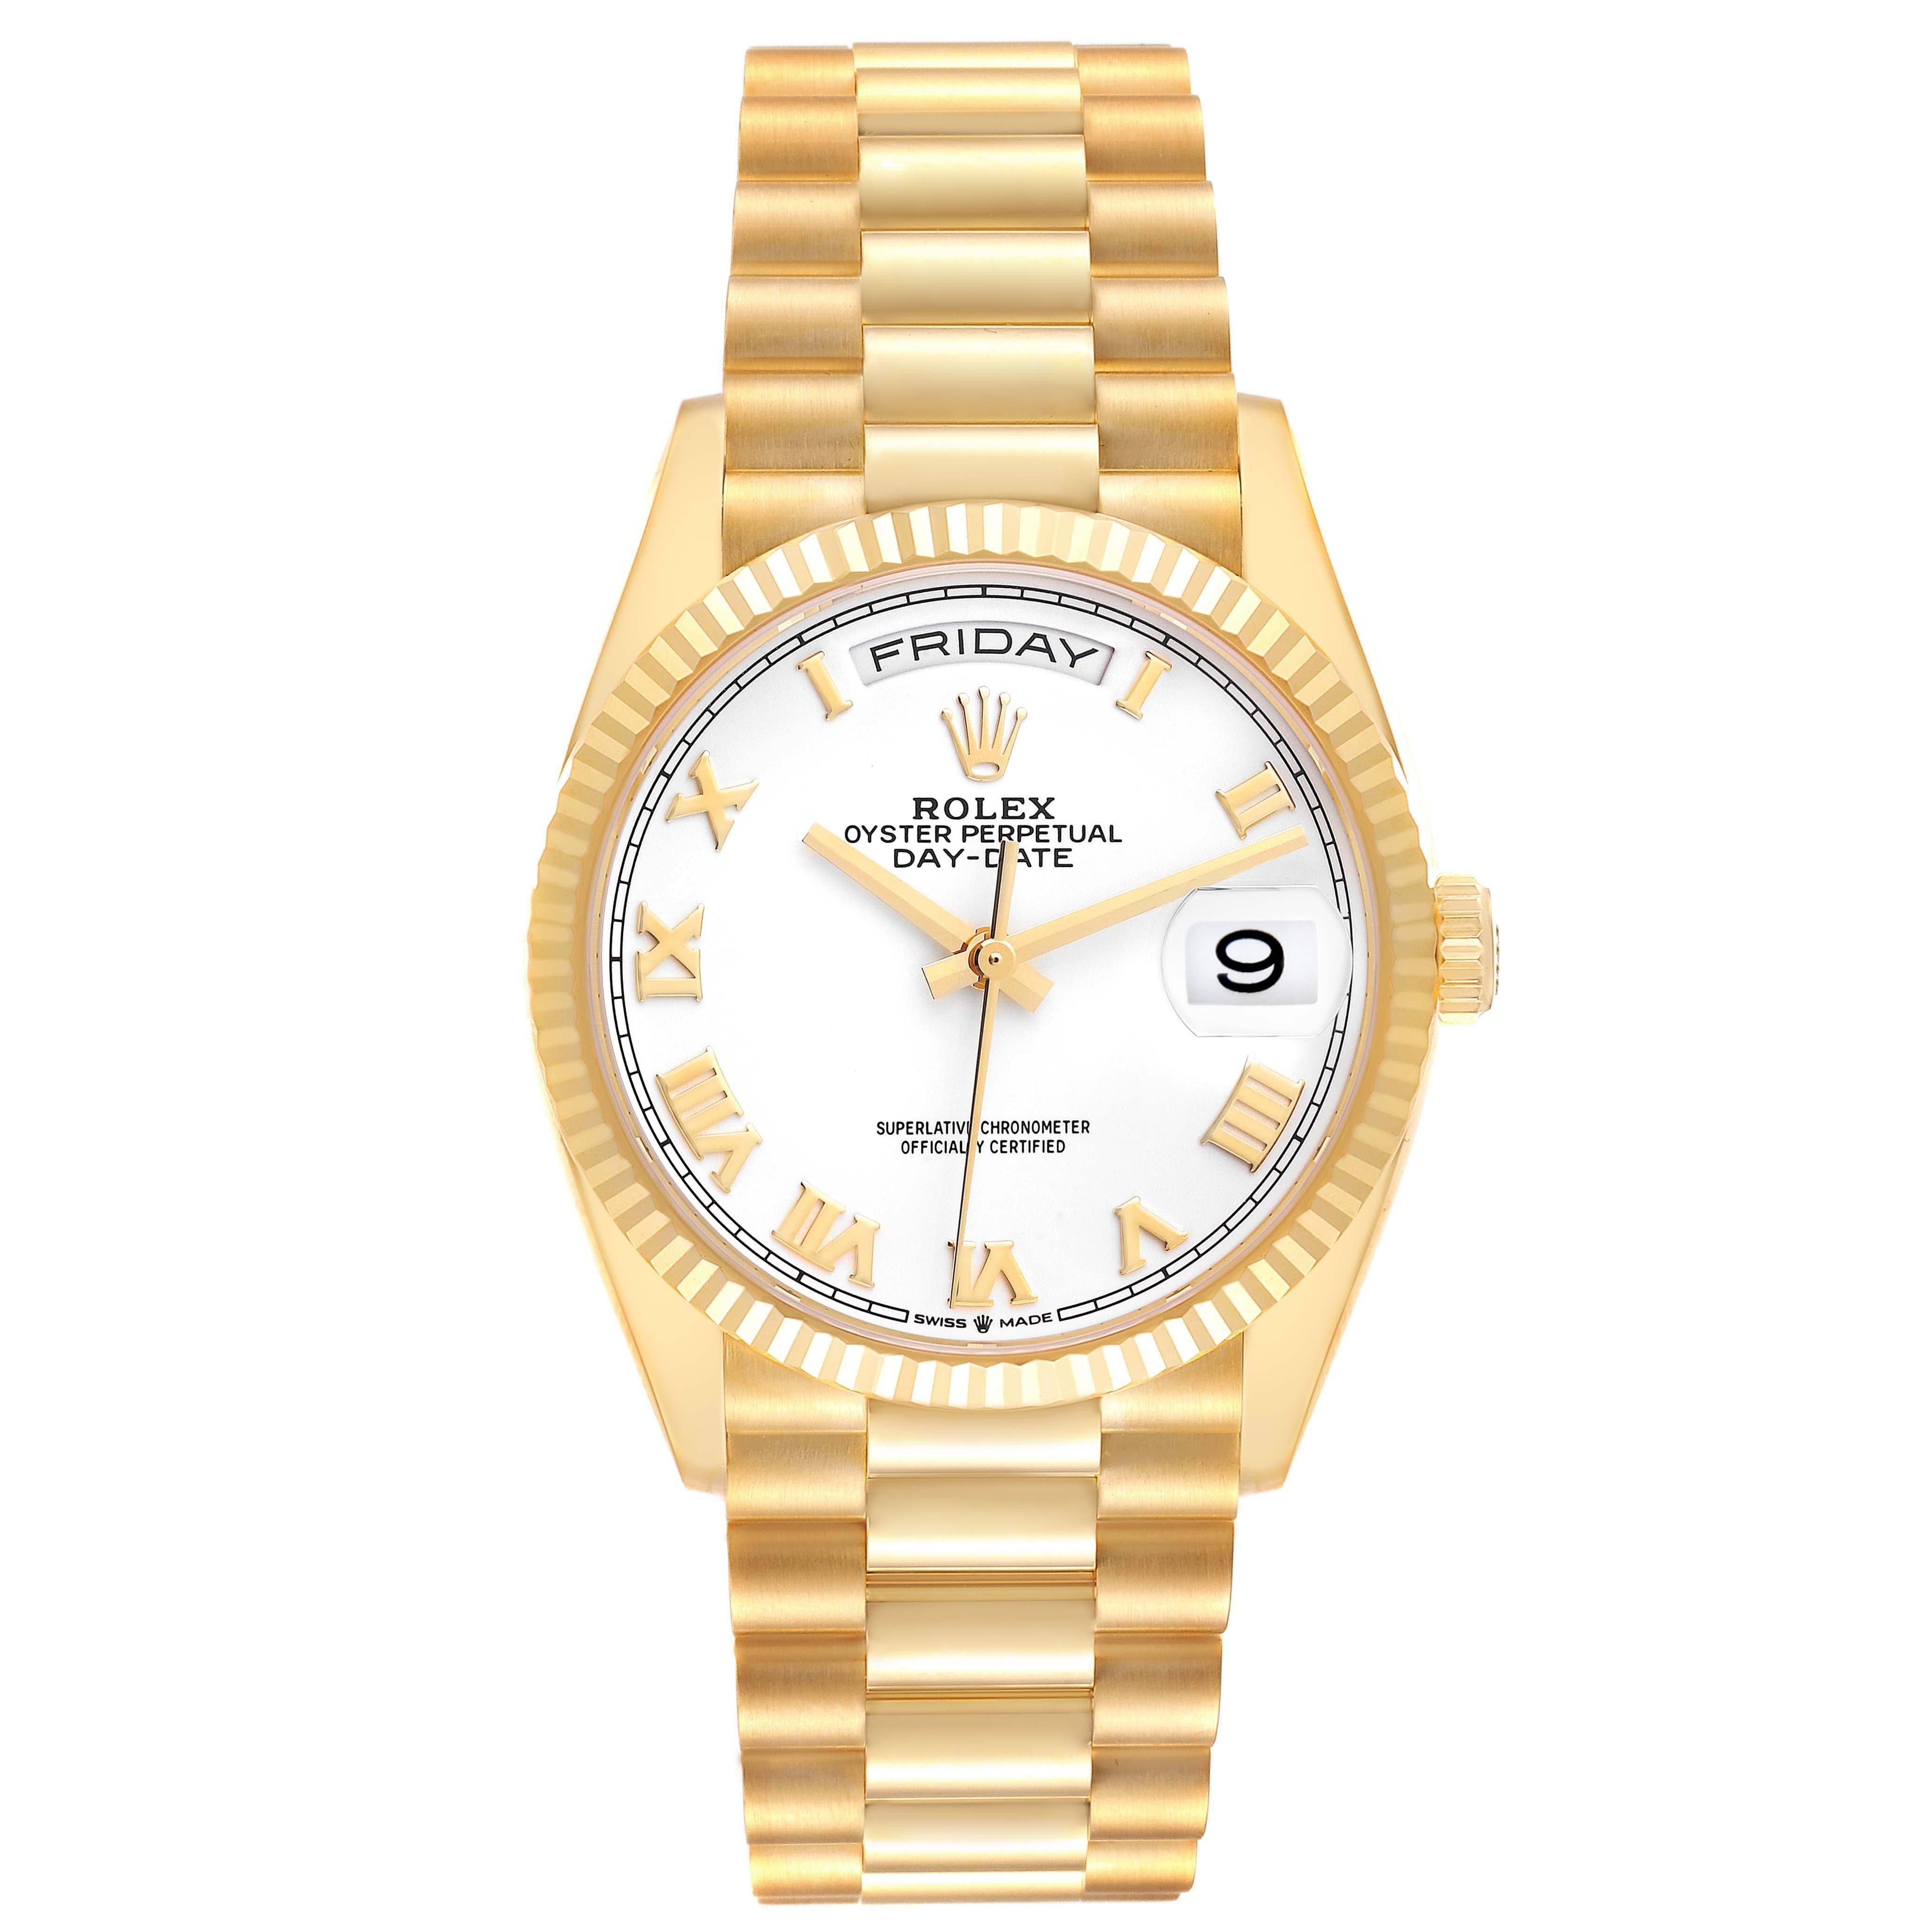 Rolex President Day-Date Yellow Gold Mens Watch 128238 Box Card. Officially certified chronometer automatic self-winding movement. 18k yellow gold oyster case 36.0 mm in diameter. Rolex logo on a crown. 18k yellow gold fluted bezel. Scratch